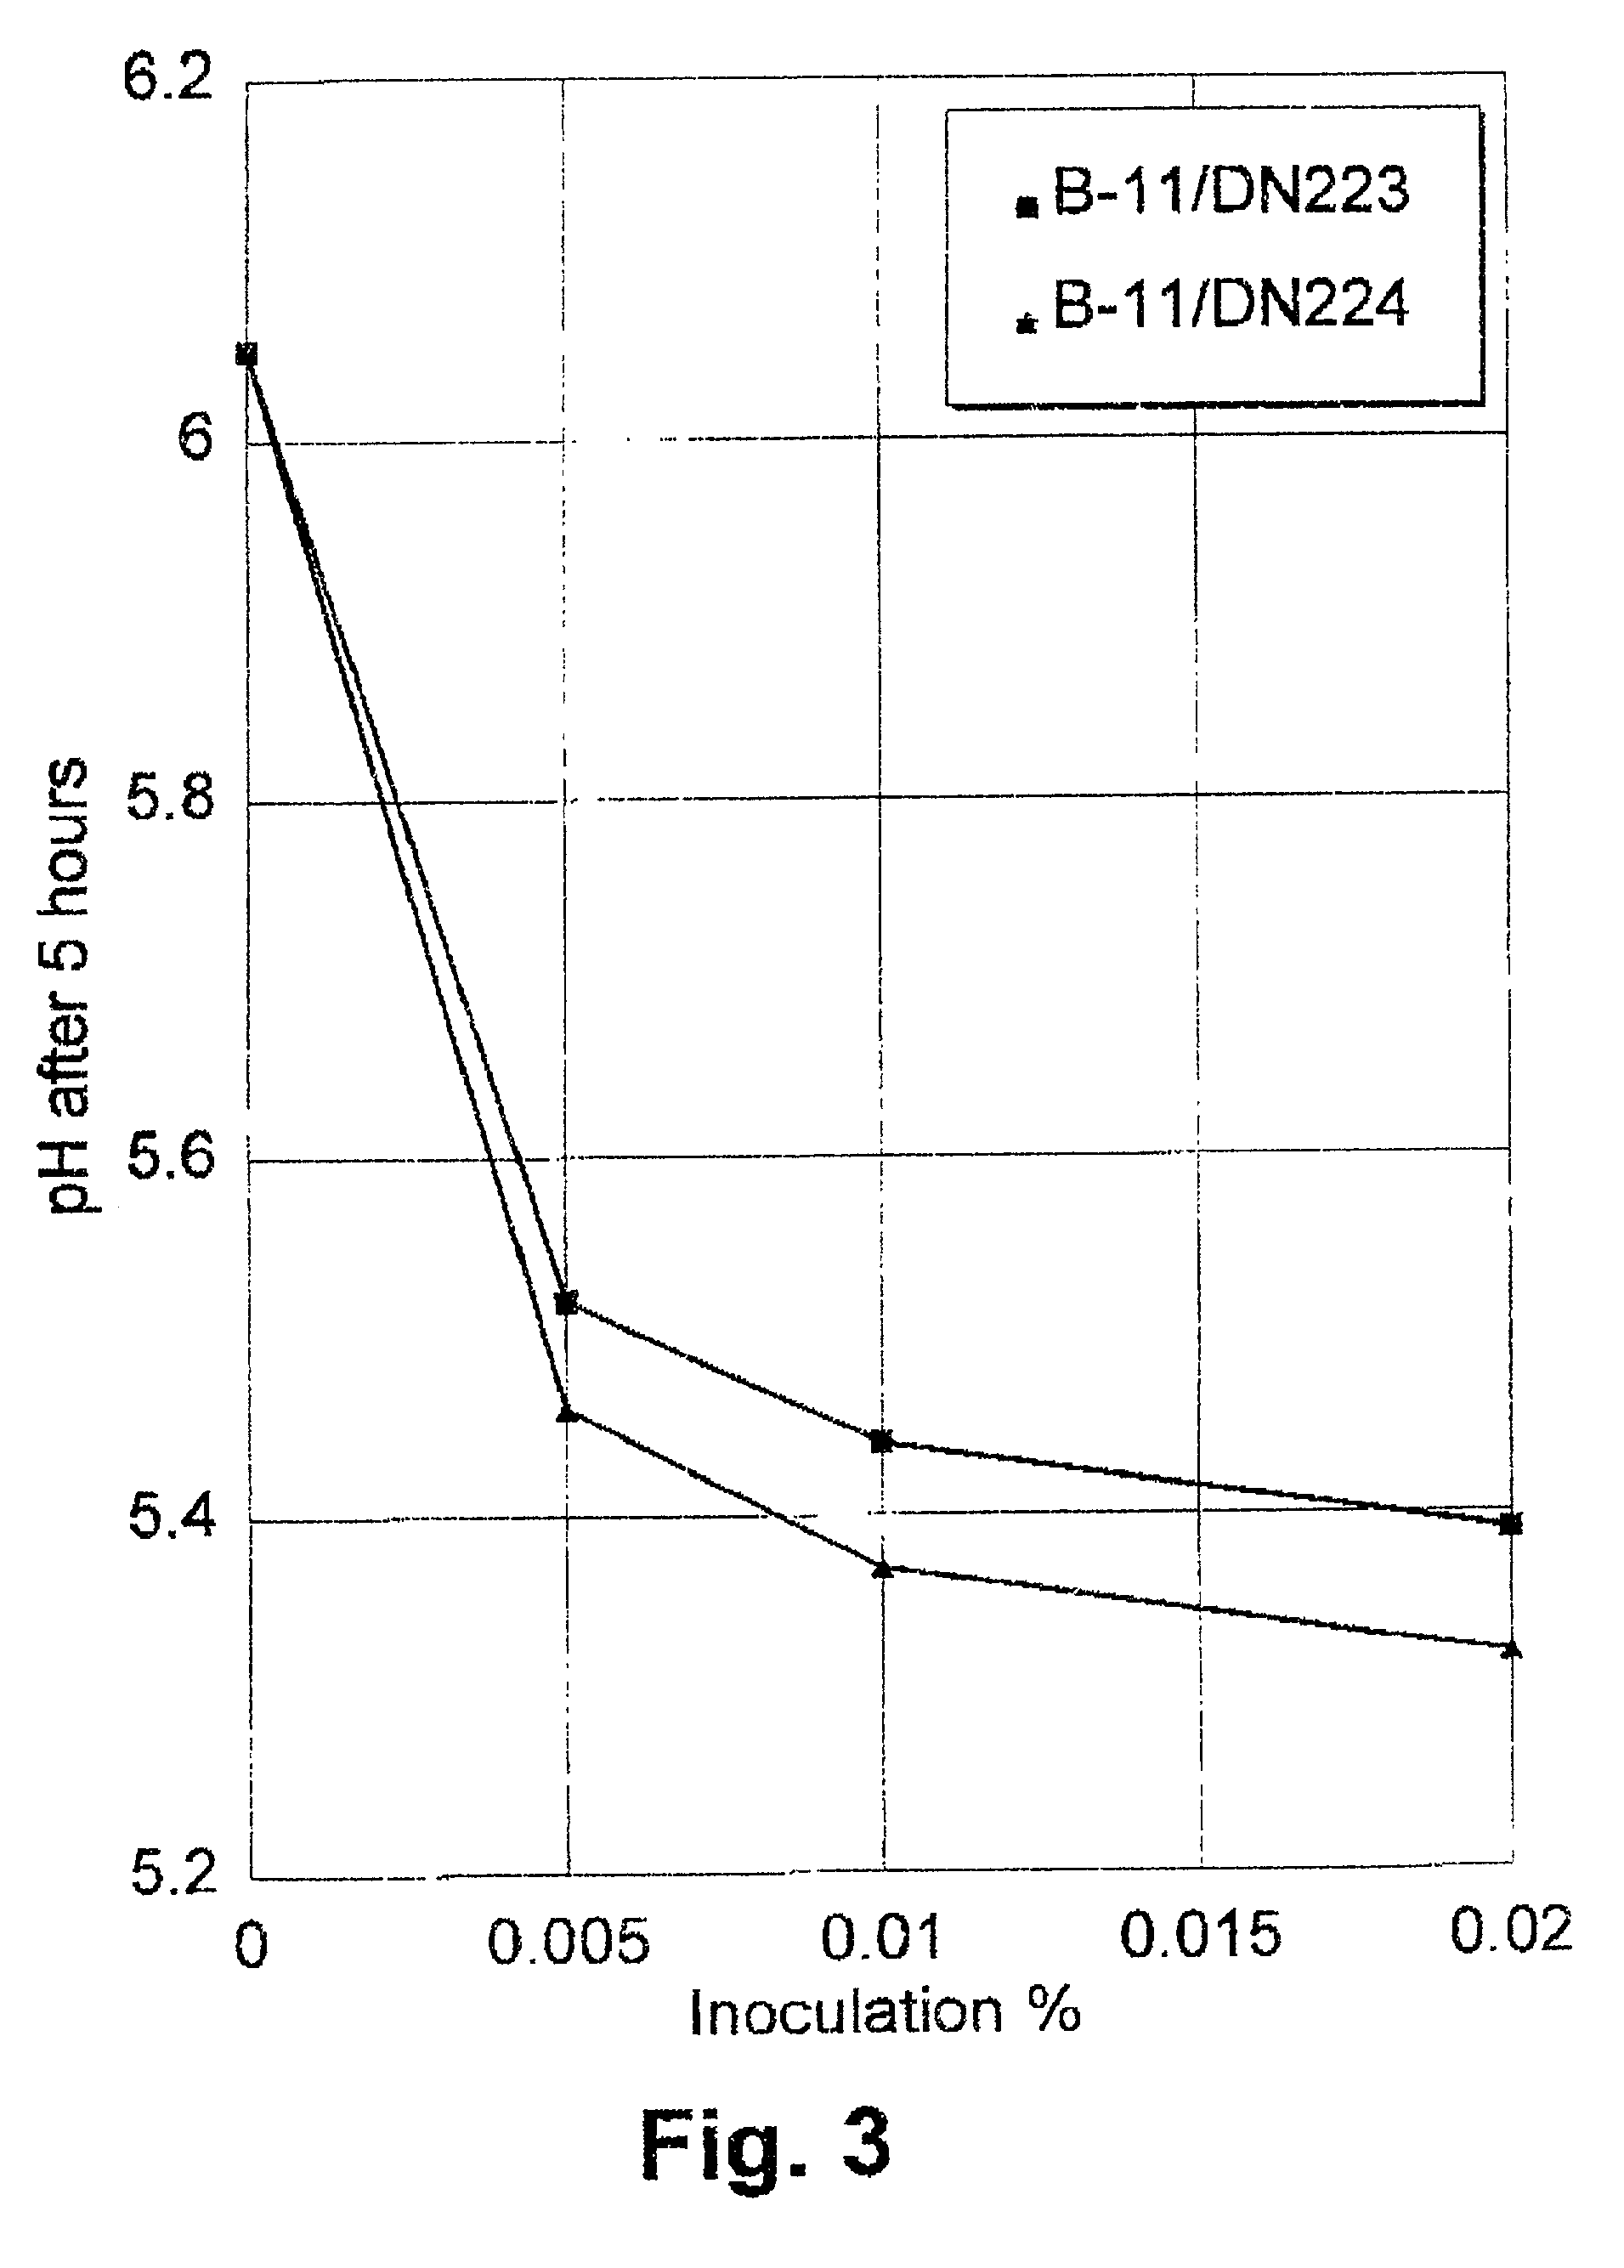 Method of improving the efficacy of lactic acid bacterial starter cultures and improved starter culture compositions